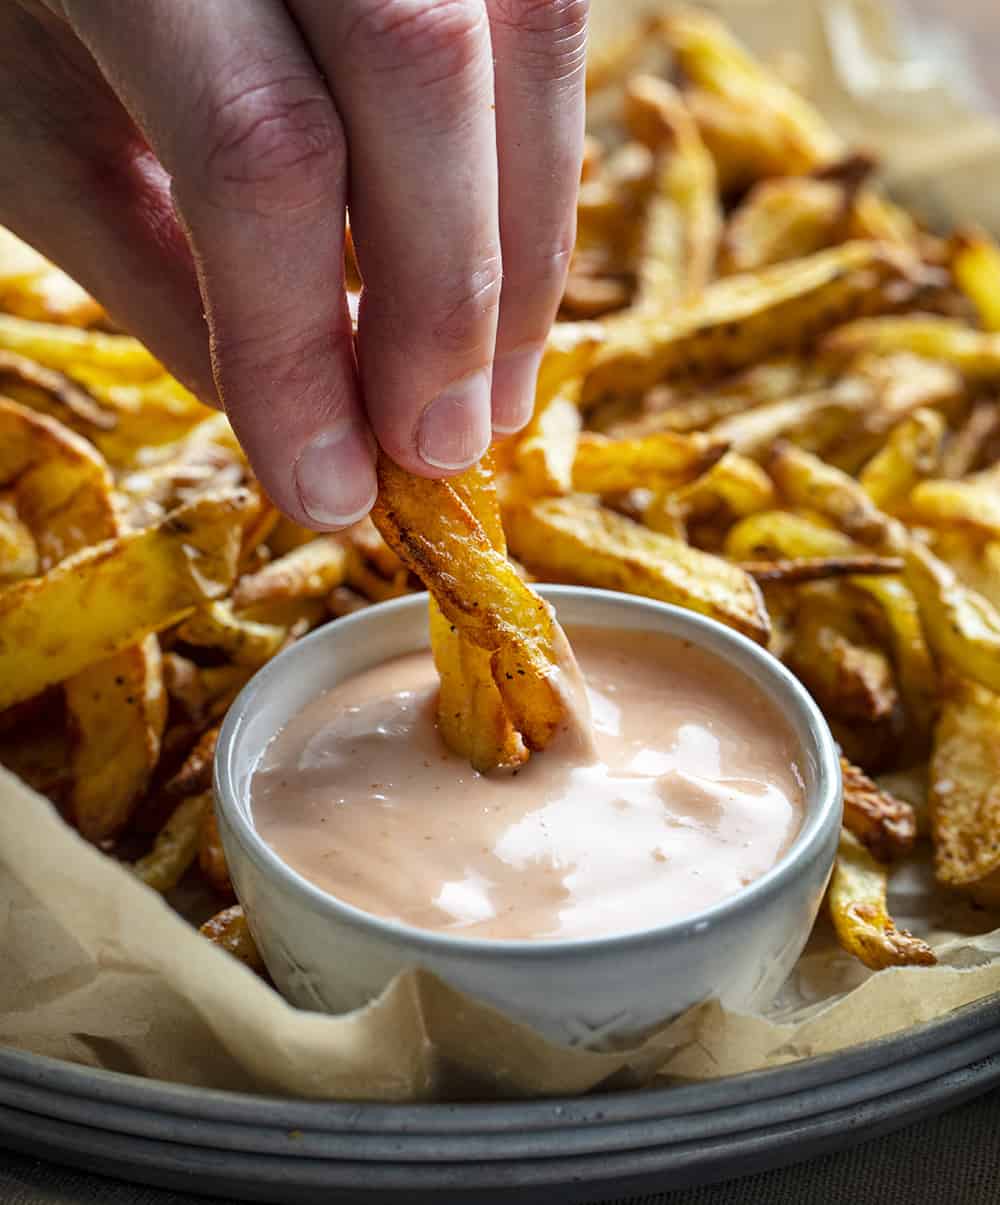 Dipping French Fries in Fry Sauce. Appetizer, French Fries, Air Fryer Recipes, How to Make French Fries, Side Dish, What to Serve with Burgers, i am homesteader, iamhomesteader